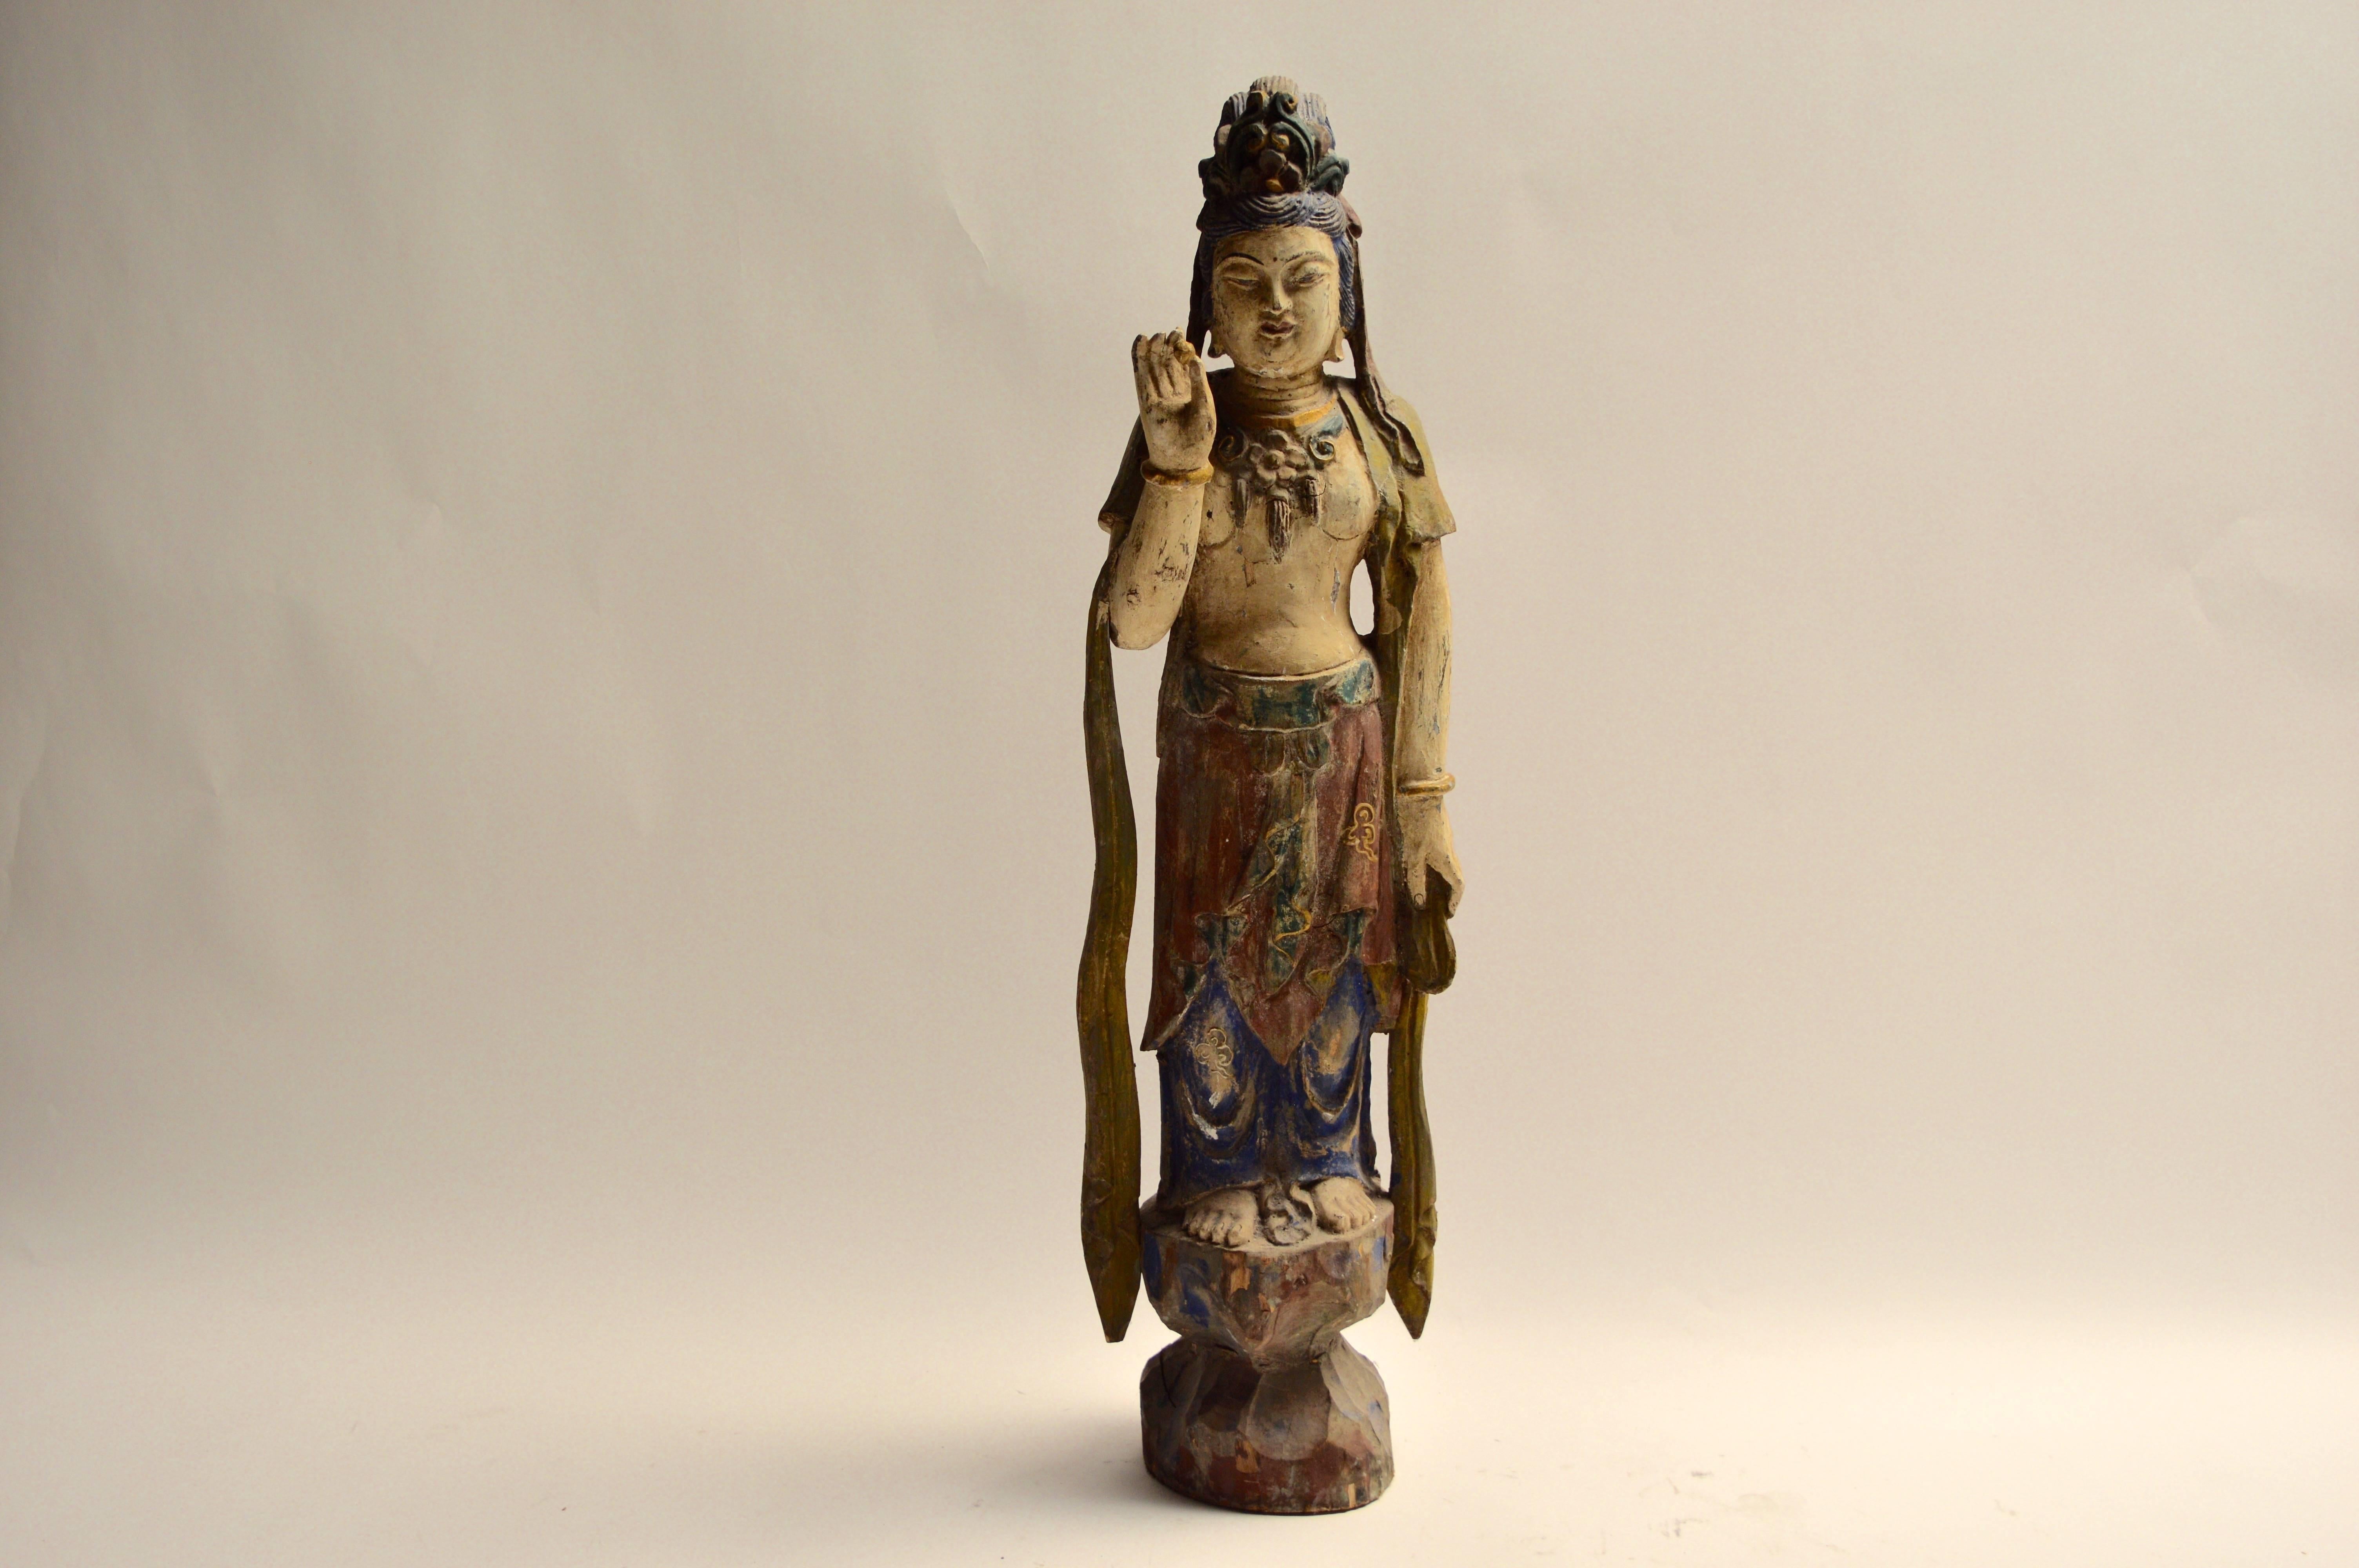 Beautiful polychrome wood sculpture with great colors. Very tranquil piece. Excellent vintage condition.